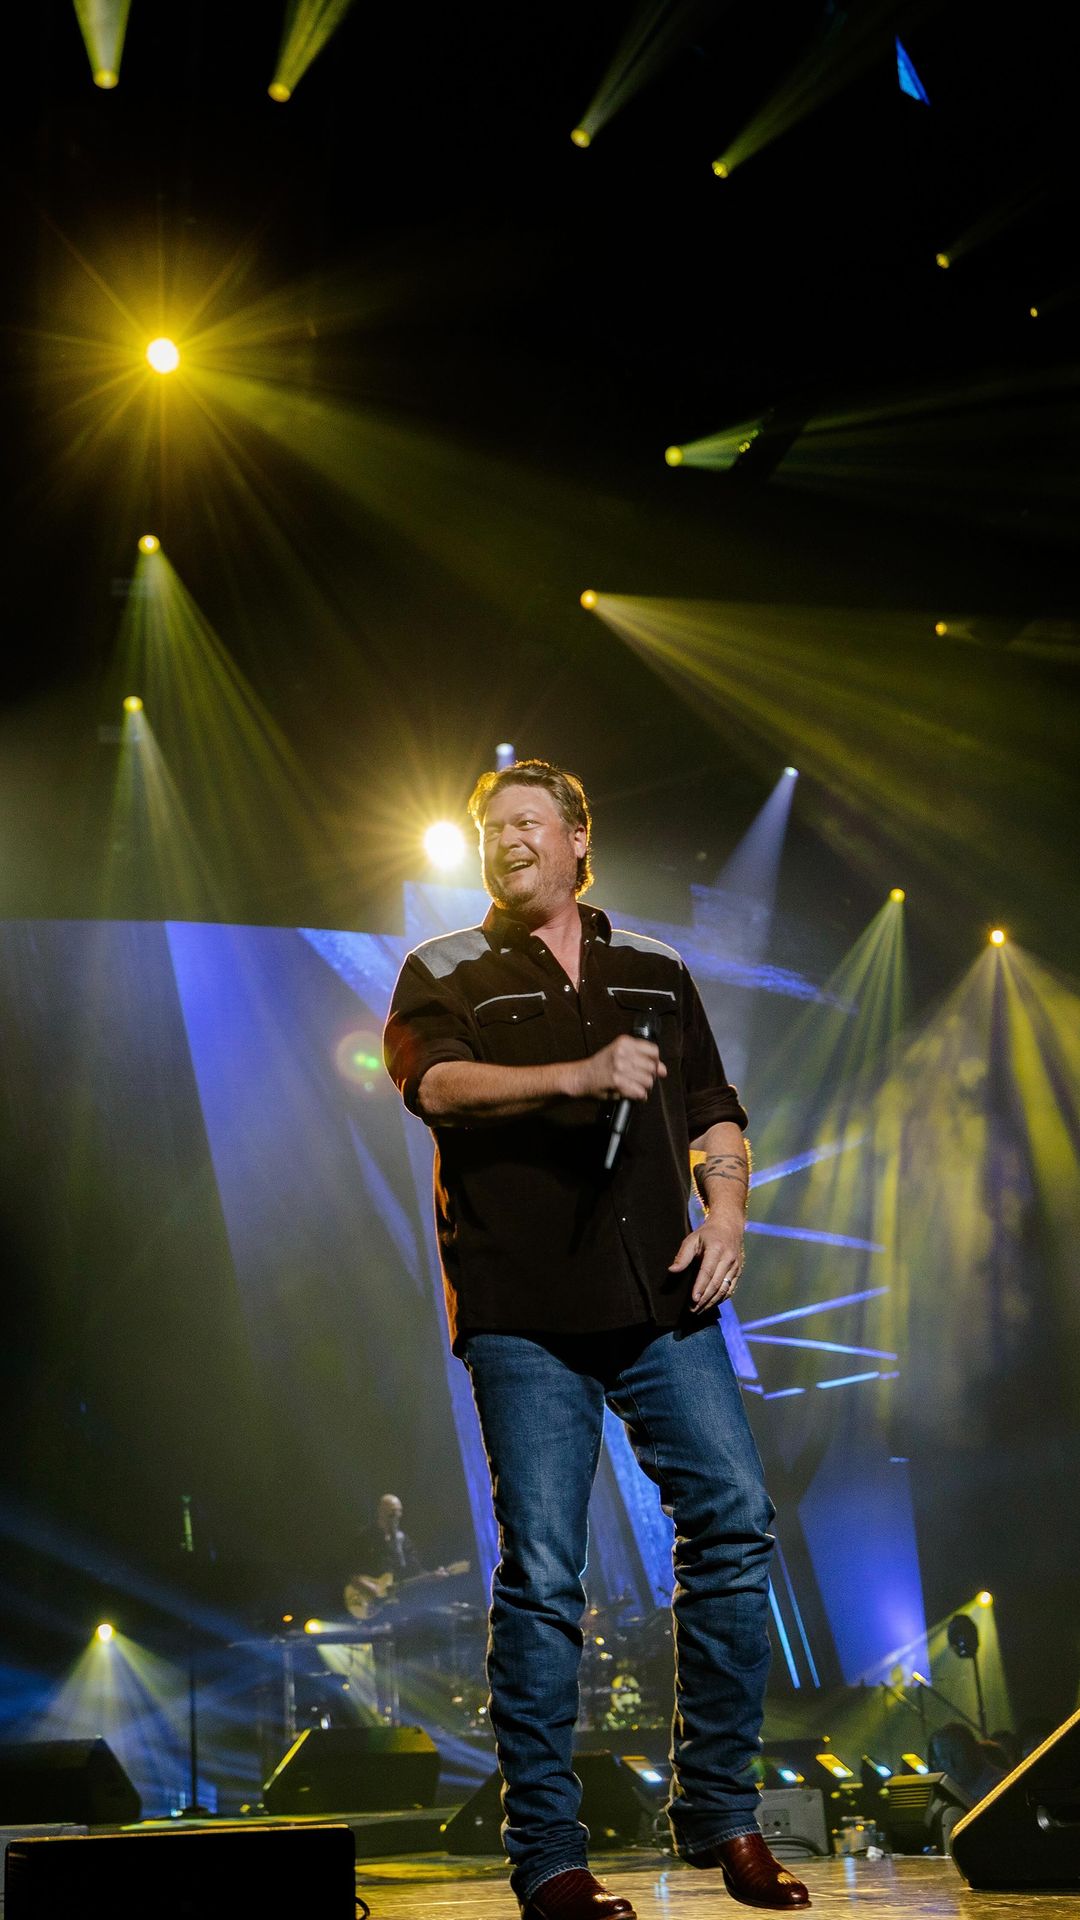 Blake previously seemed excited that he only had one weekend left of his nationwide tour